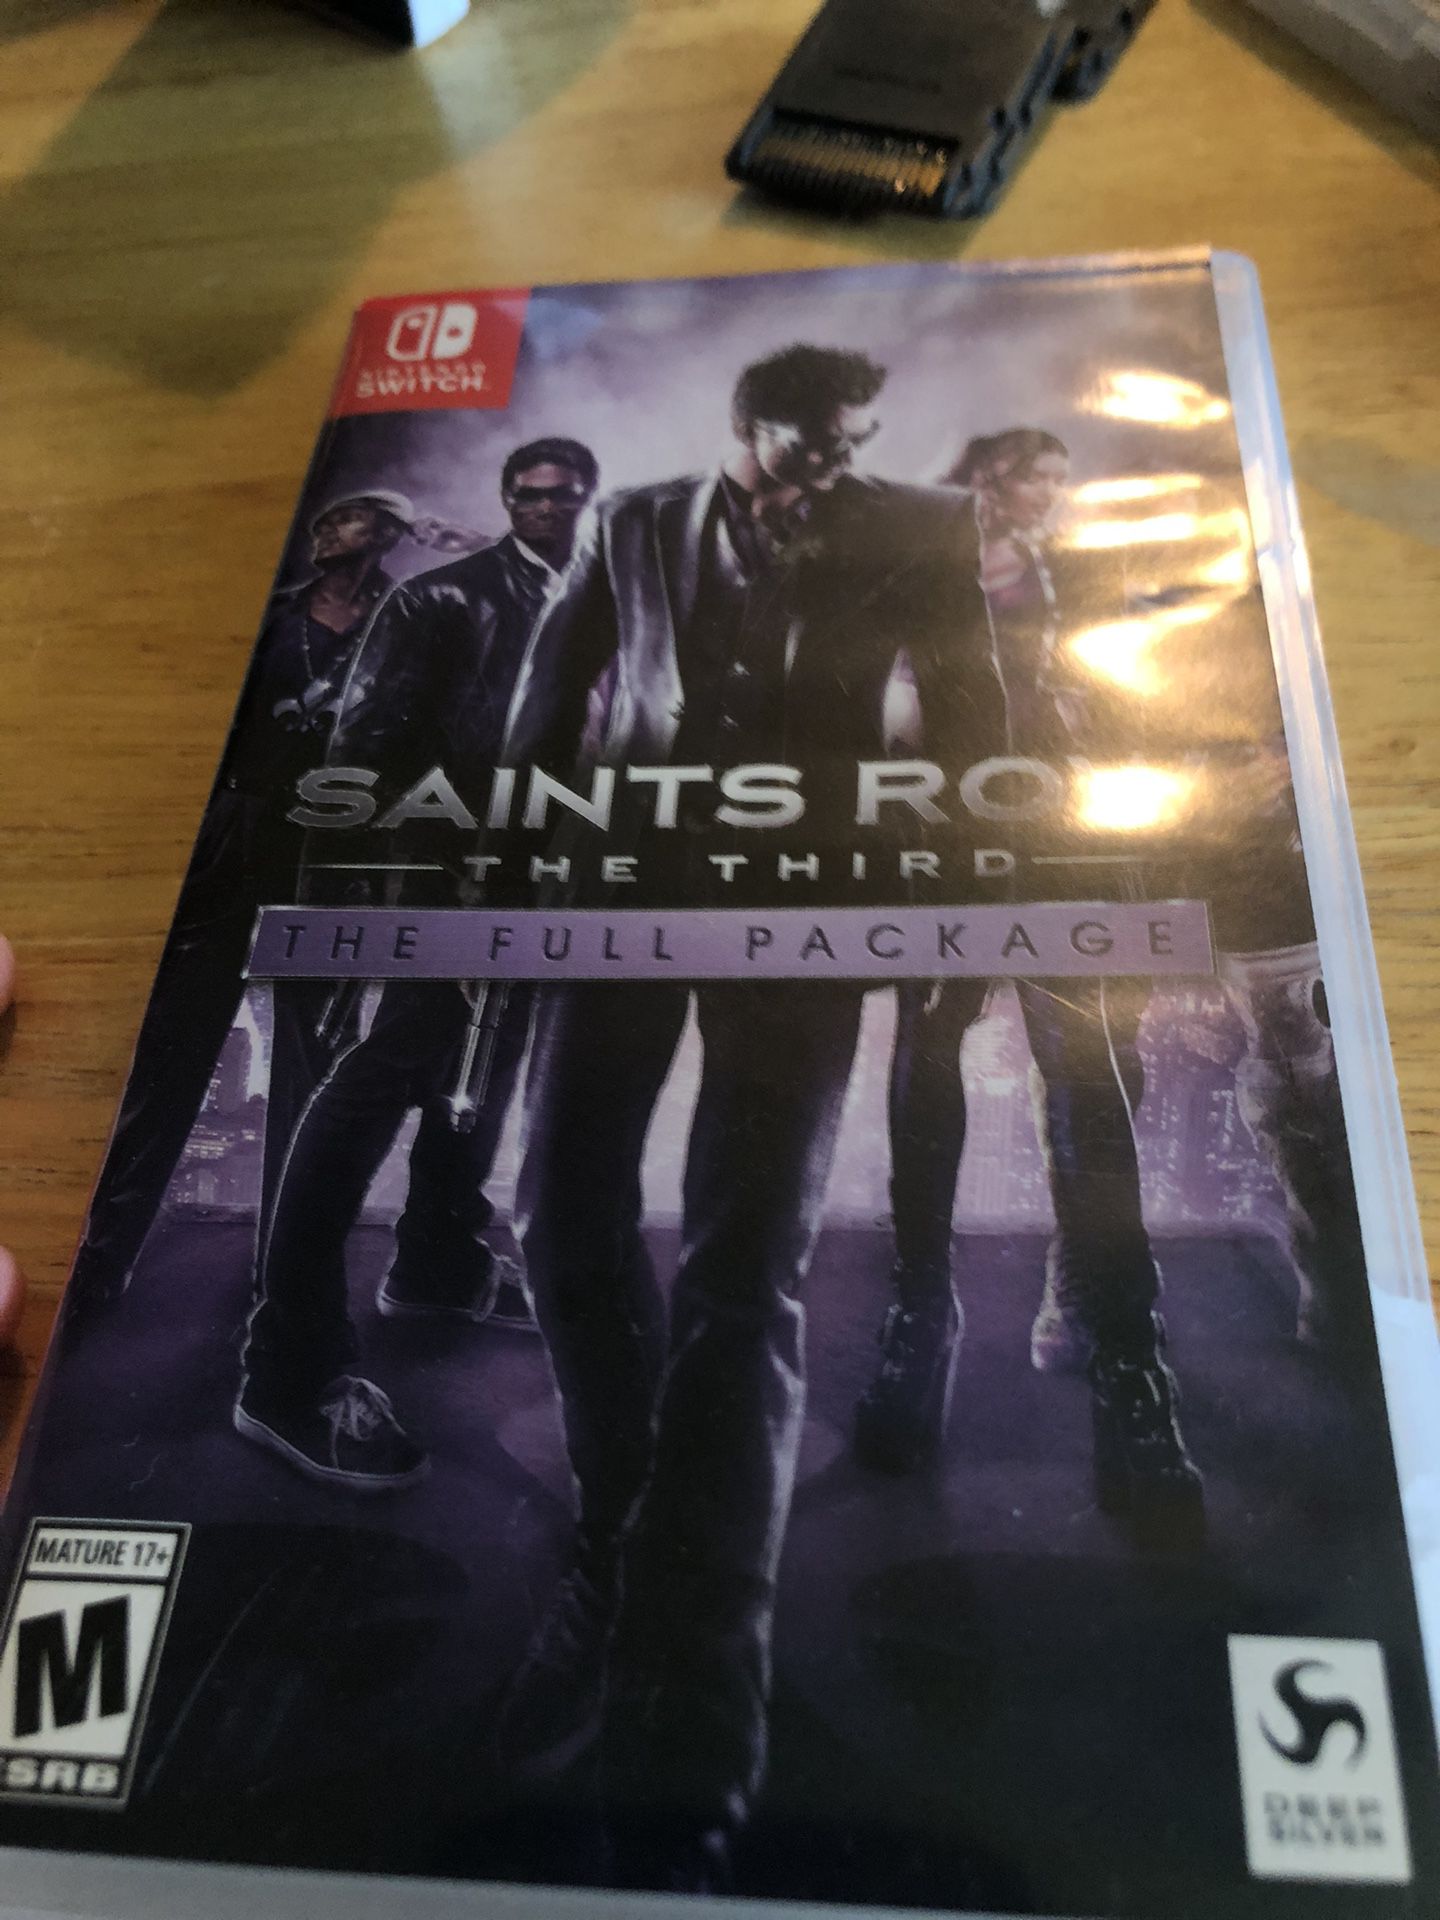 Saints Row The Third: The Full Package for Nintendo Switch